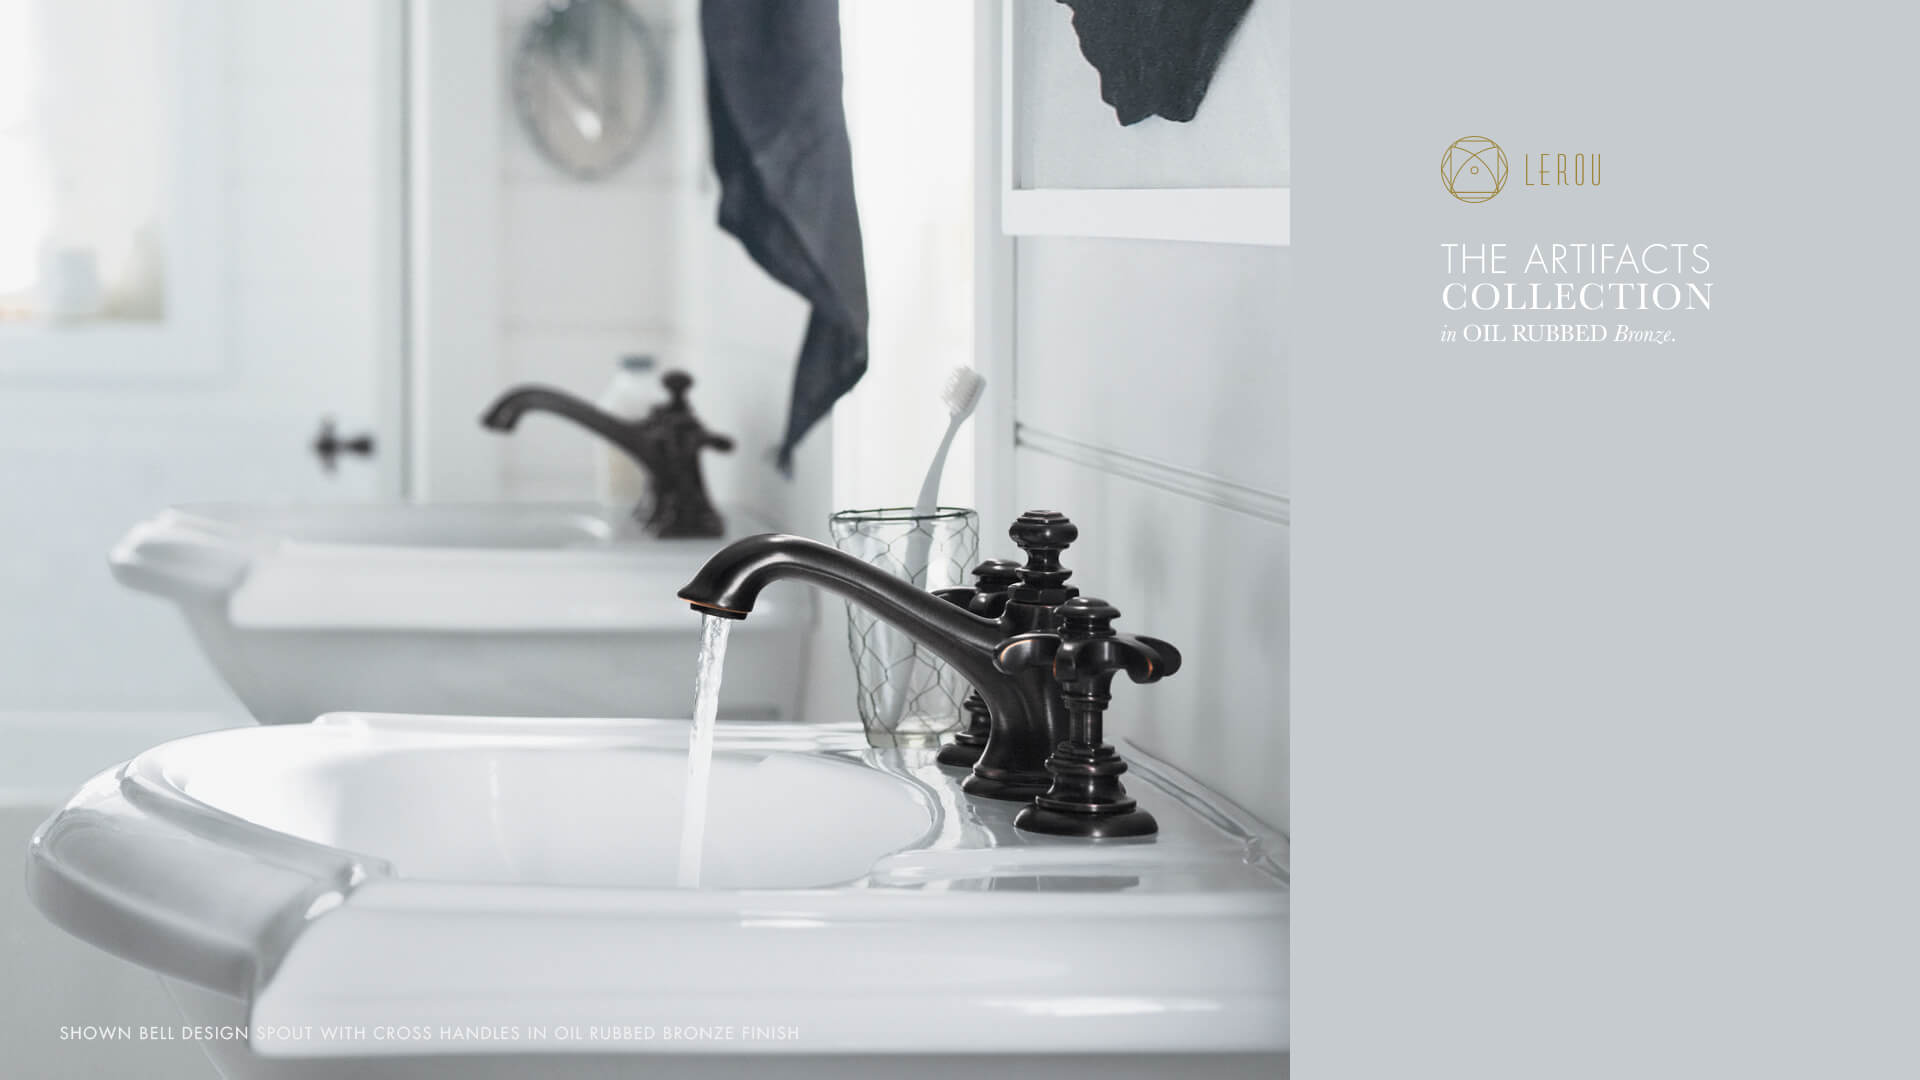 Design Your Tap As You Like: The Artifacts Collection in Oil Rubbed Bronze. Ontwerp uw kraan zoals u wenst: de Artifacts collectie in olie brons.